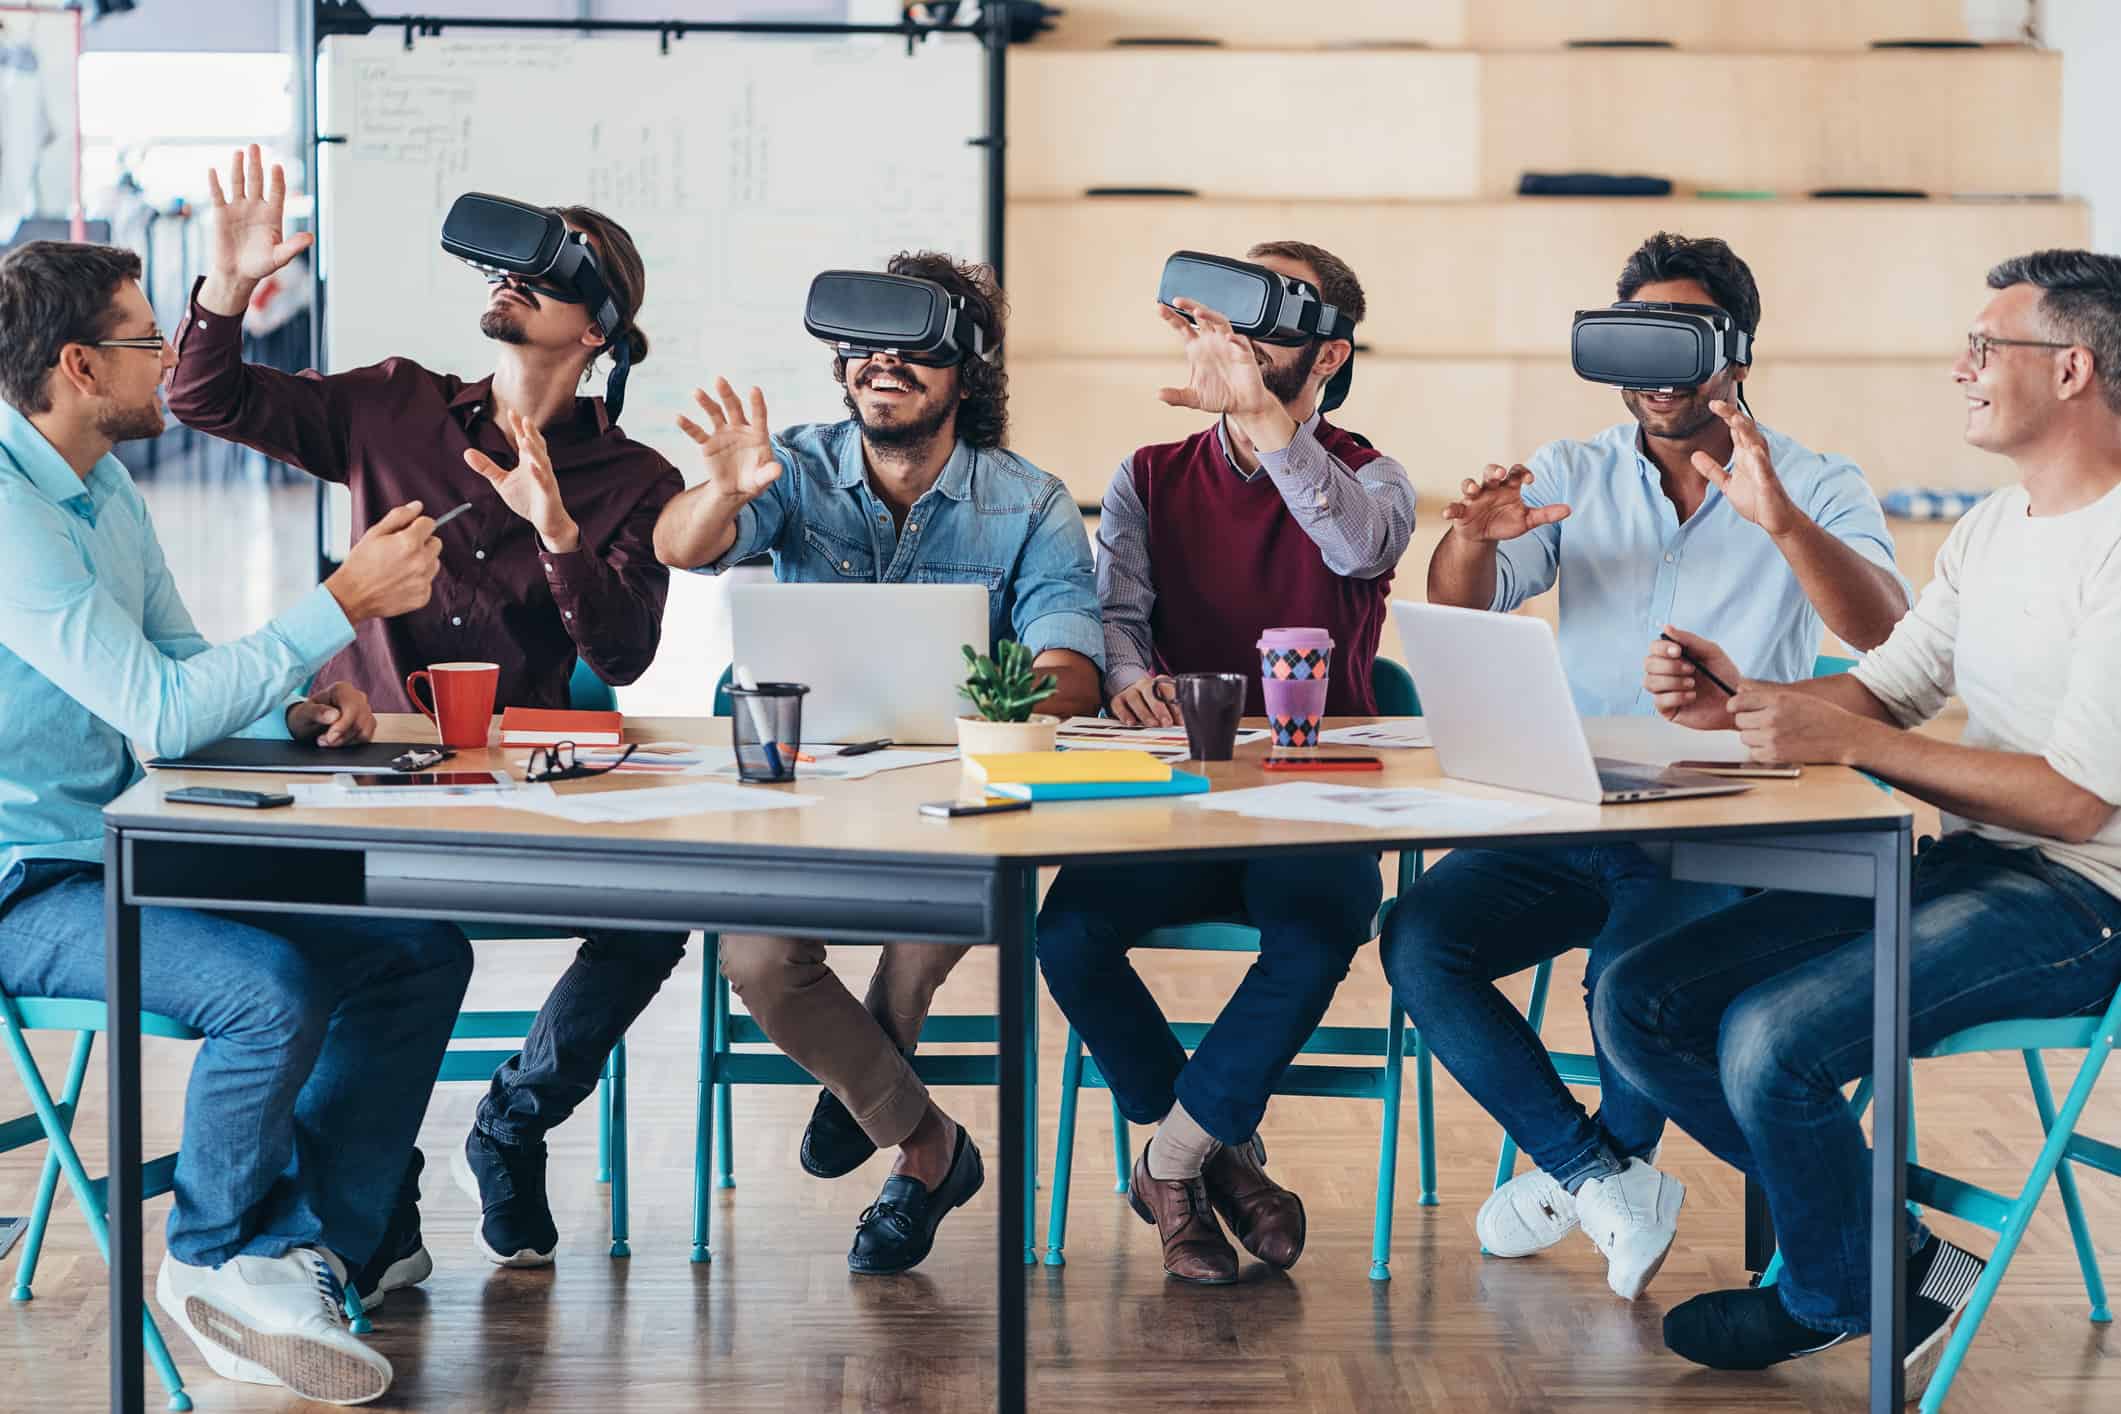 Virtual Reality for collaborative work